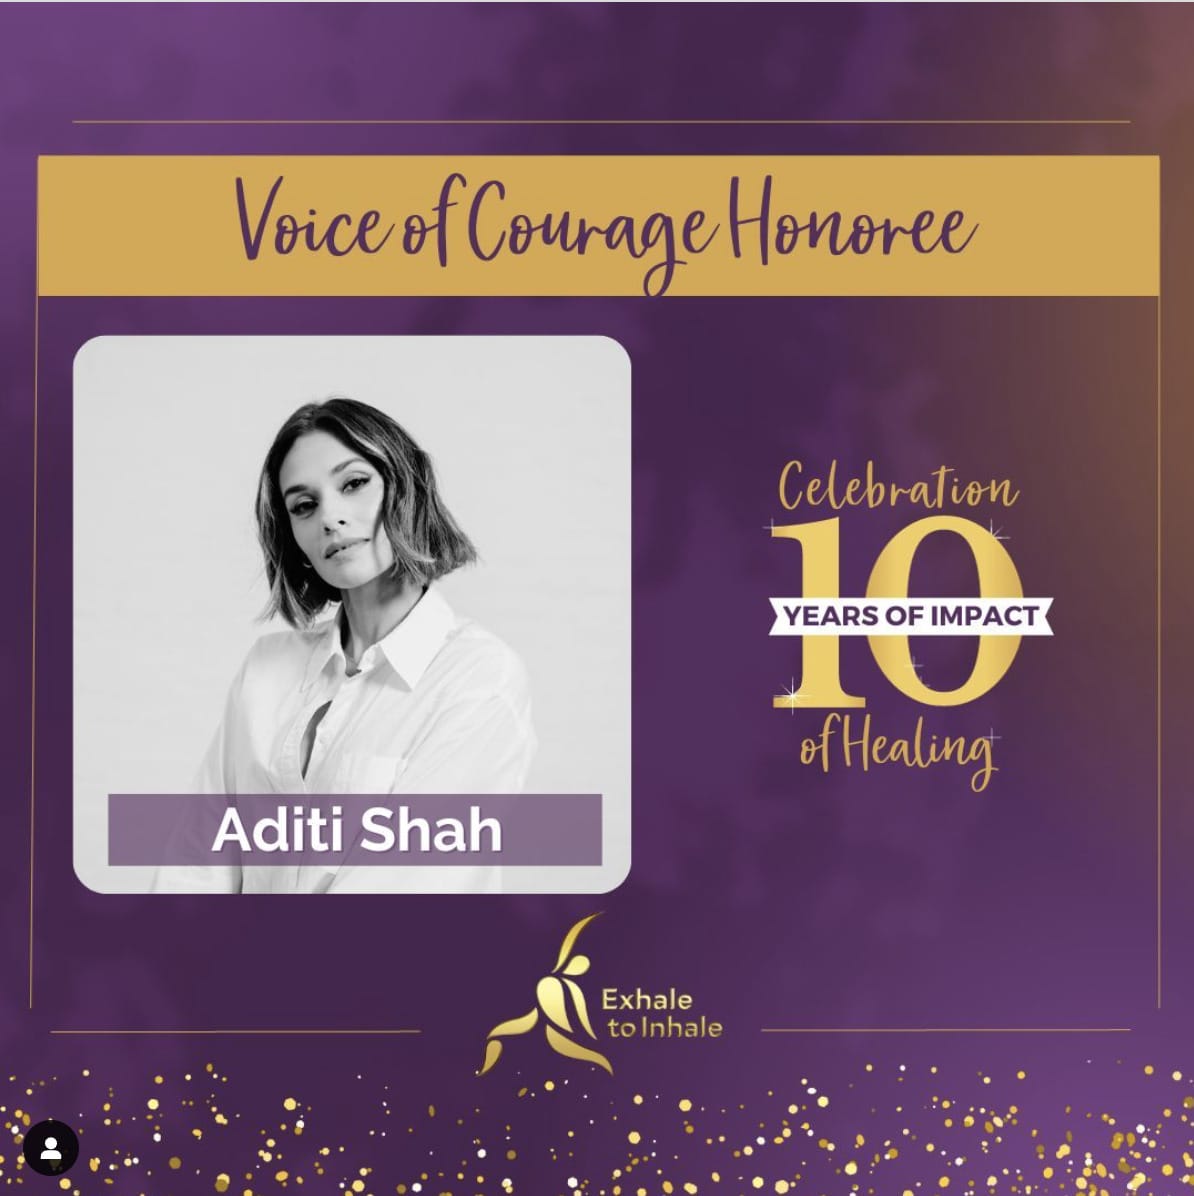 Aditi Shah as Voice of Courage Honoree. Image credit Exhale to Inhale.